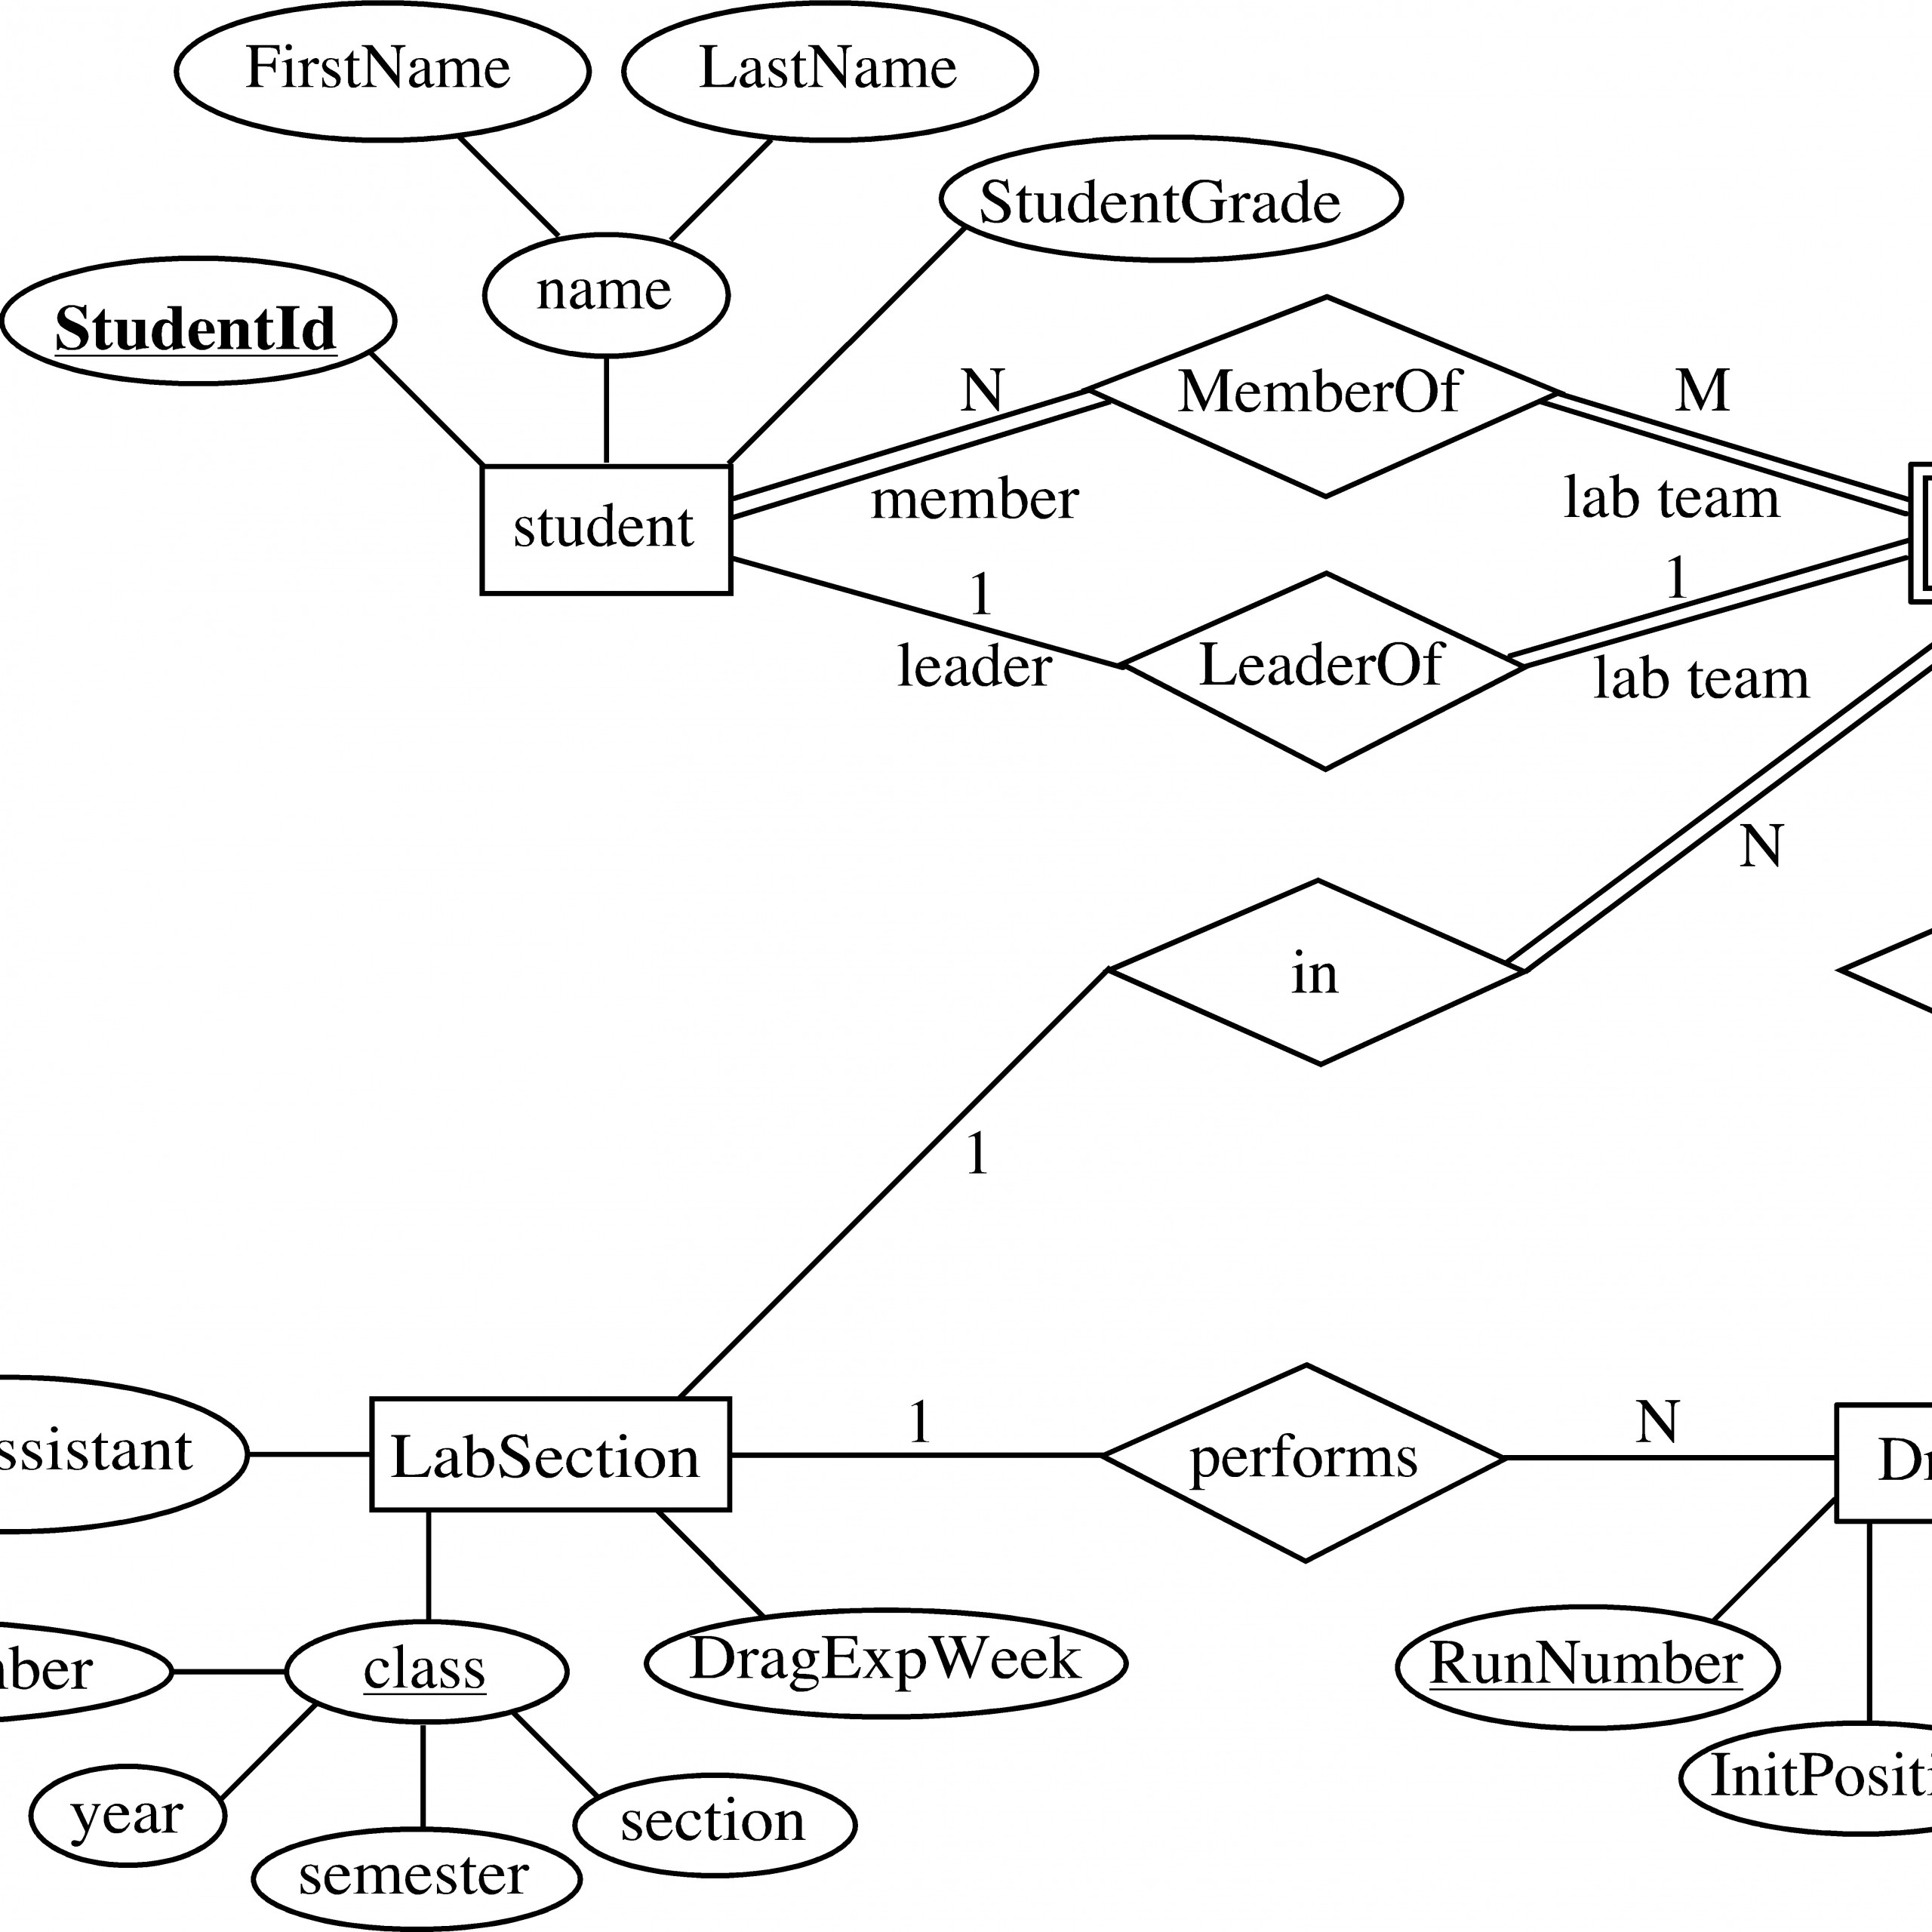 42 Friendly How To Draw Er Diagram In Dbms With Examples regarding Entity Relationship Diagram In Dbms